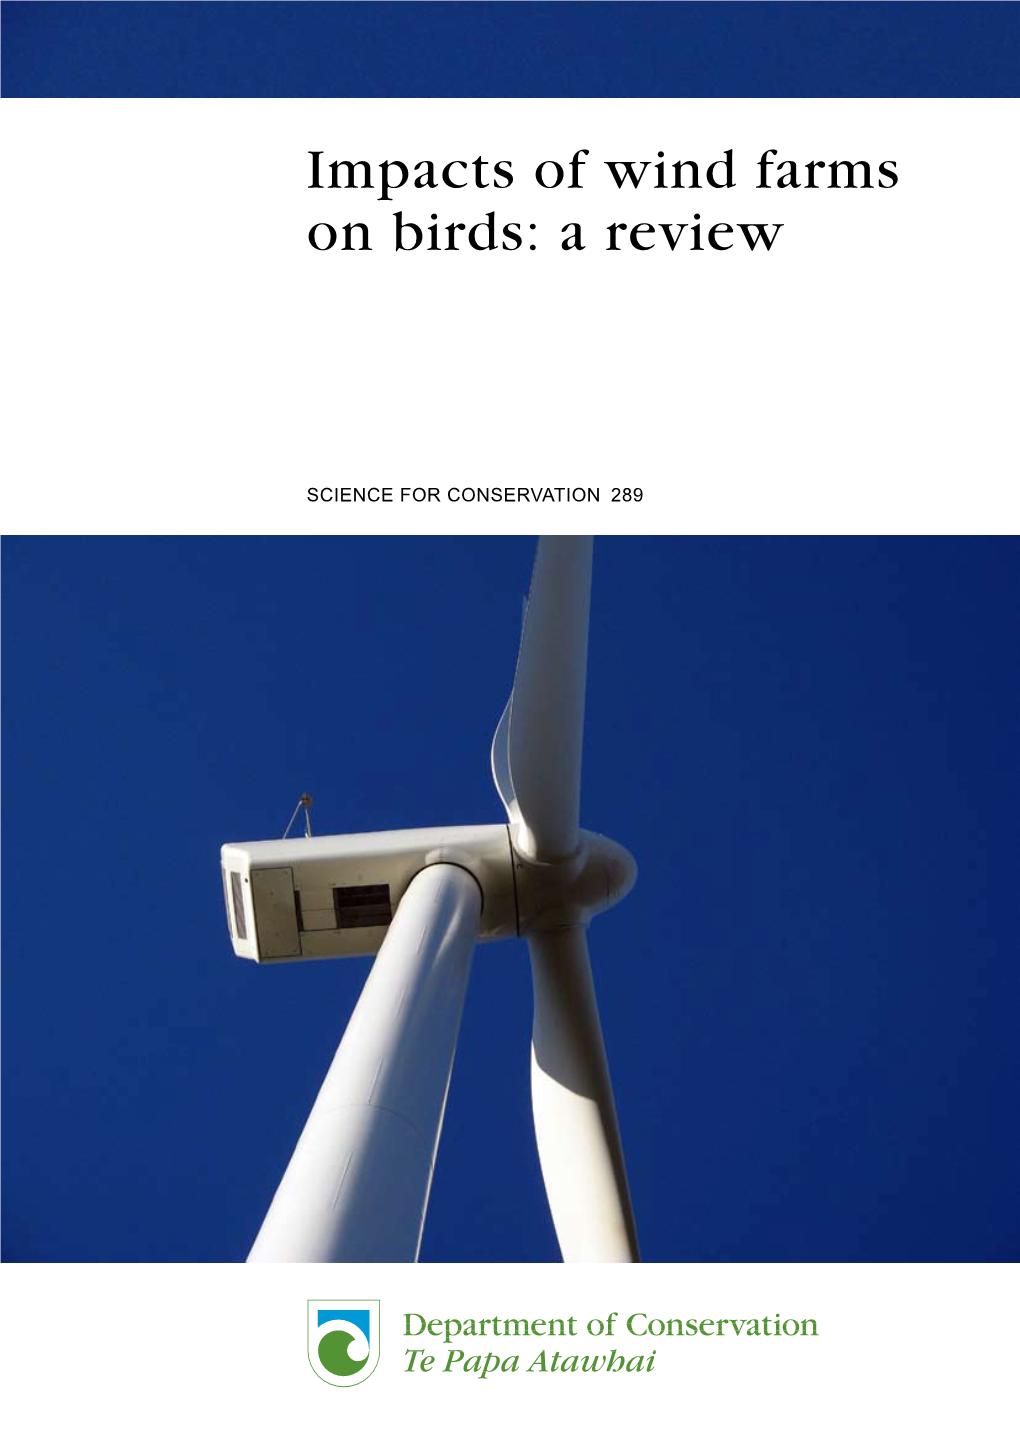 Impacts of Wind Farms on Birds: a Review